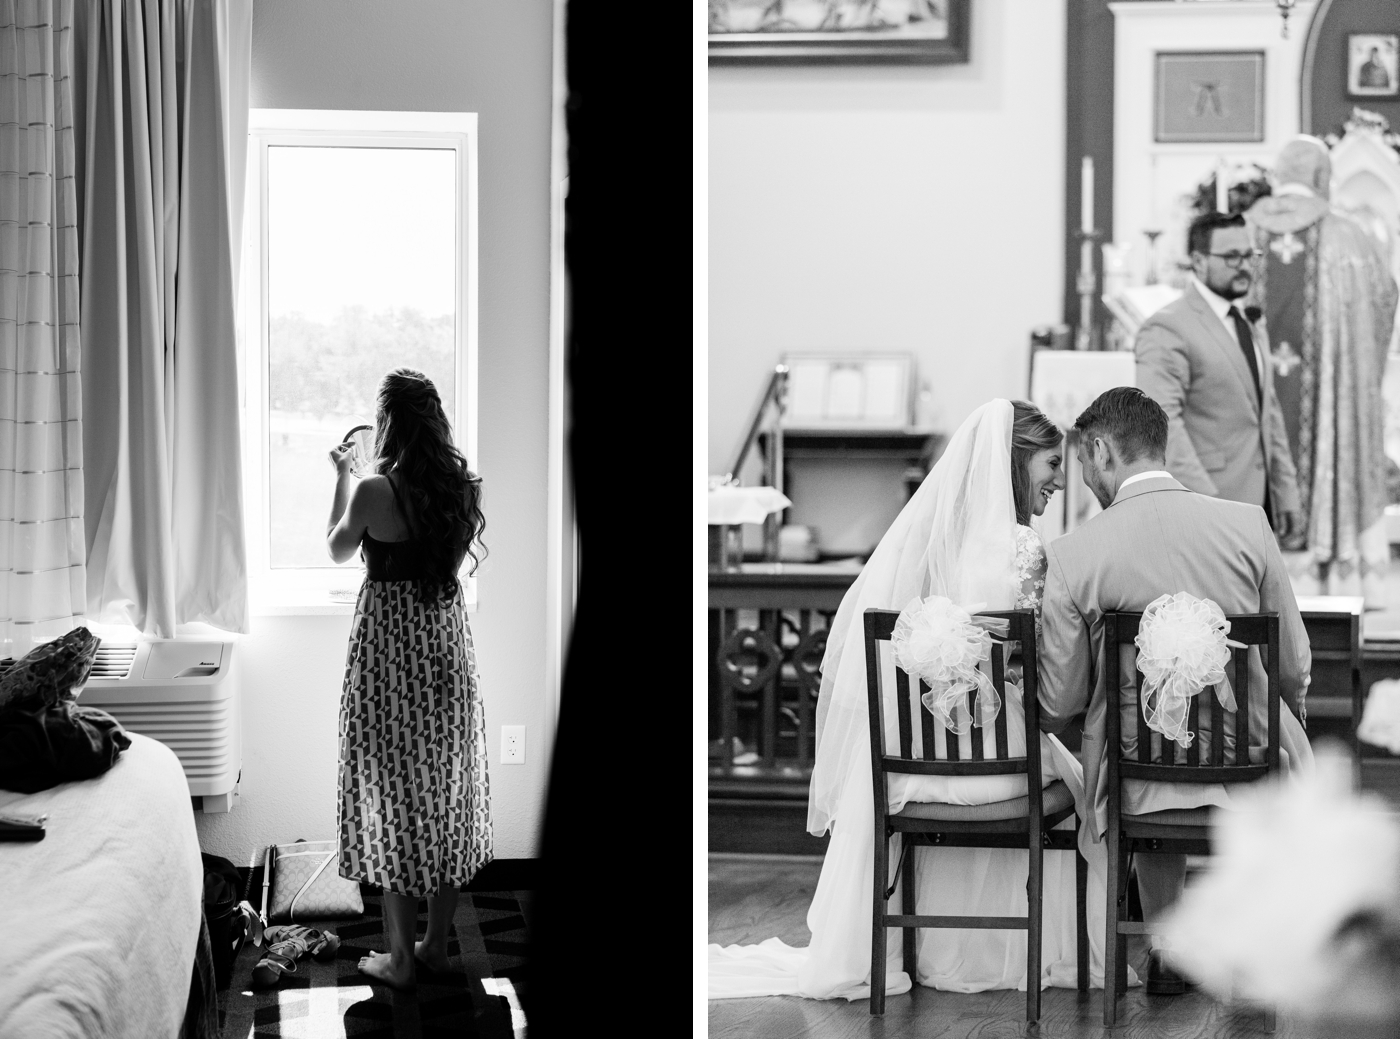 Your Guide for How to Hire a Wedding Photographer